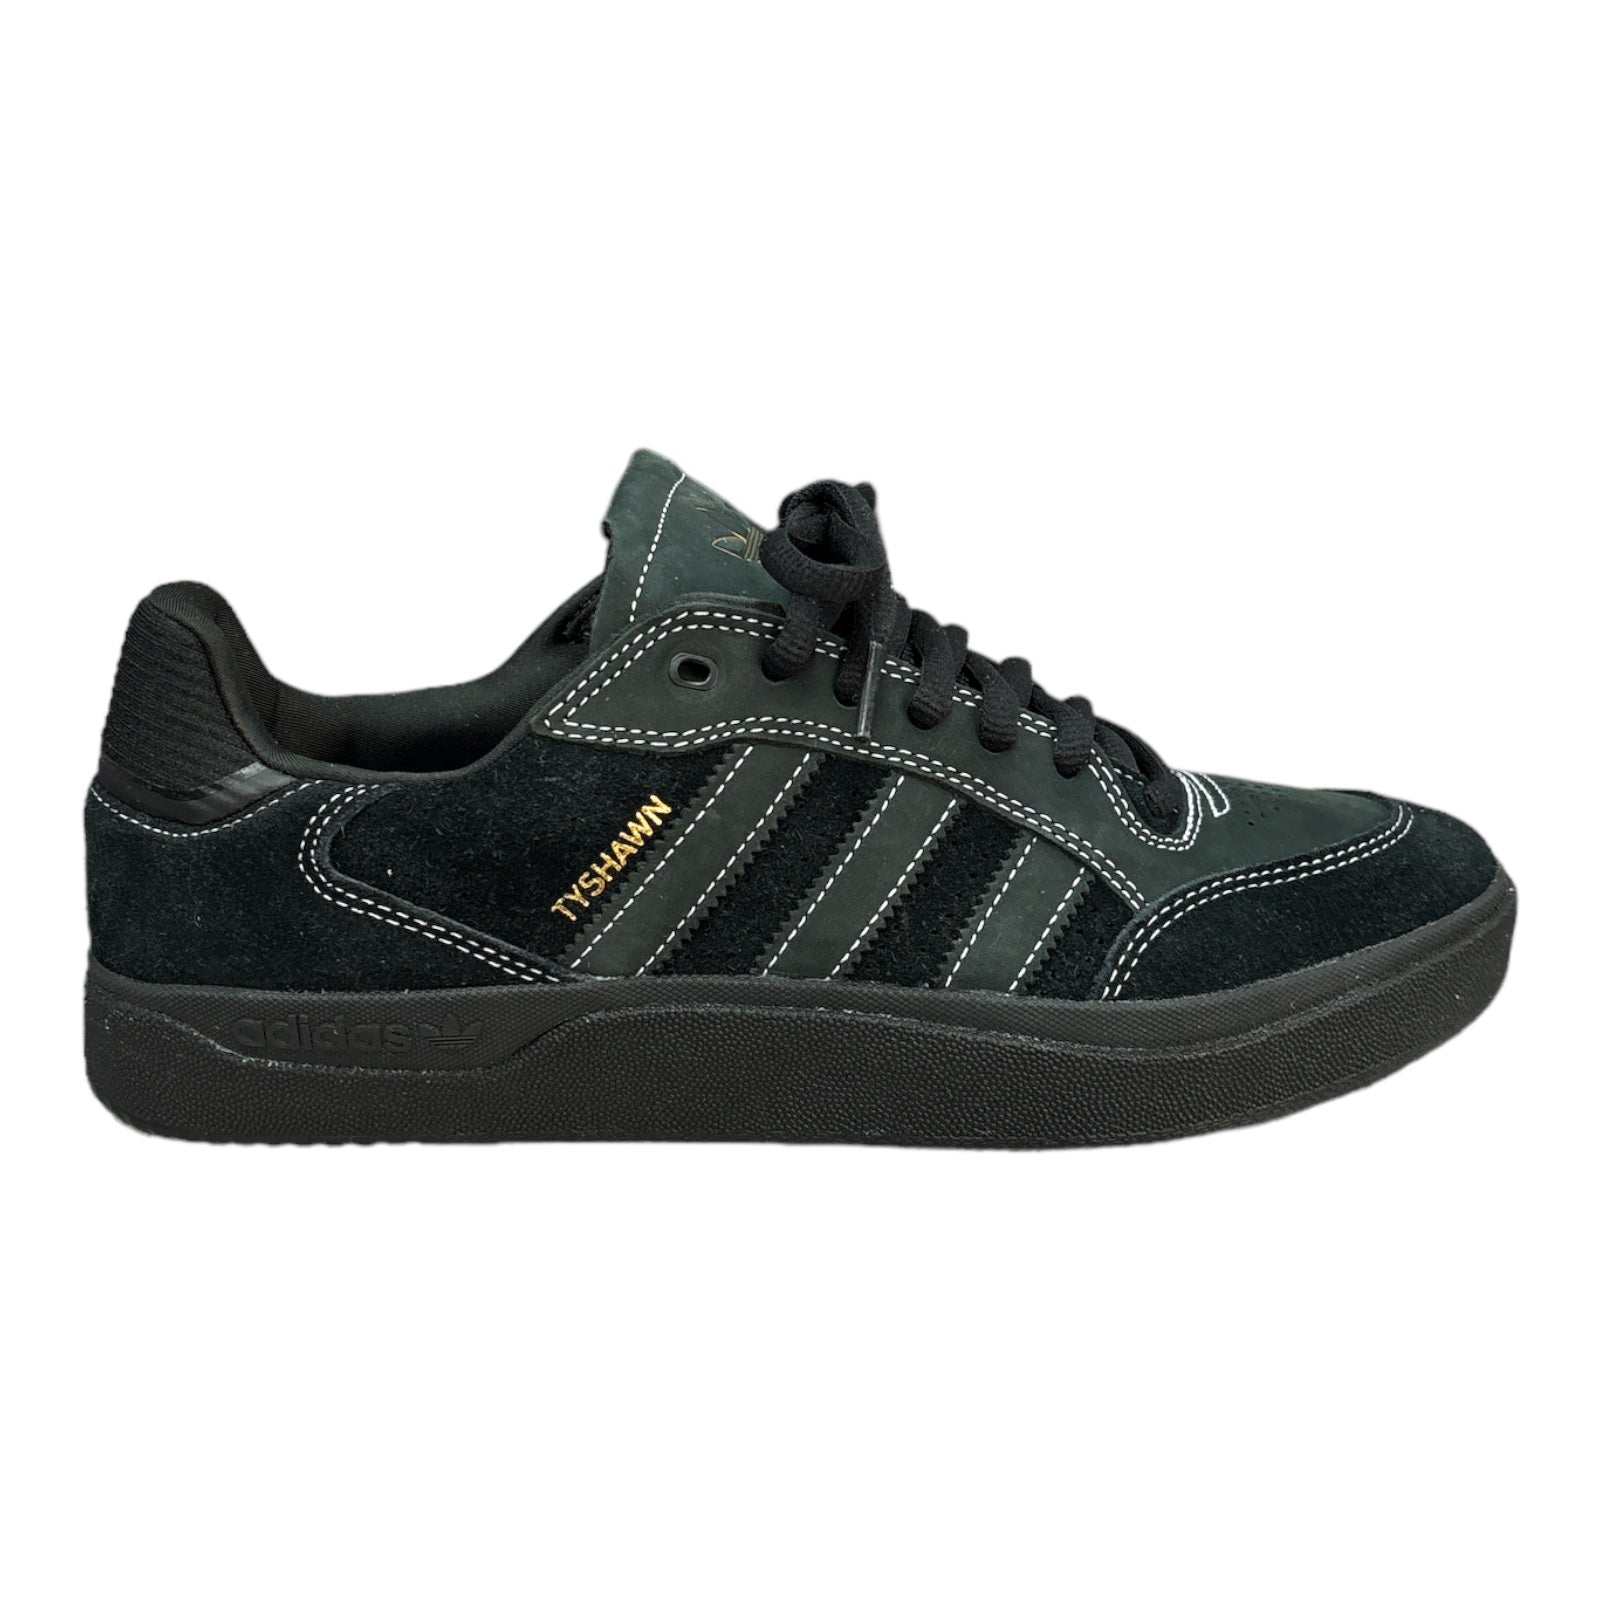 Adidas Tyshawn Low In BLack & Forest Green Suede with Black Outsole. 